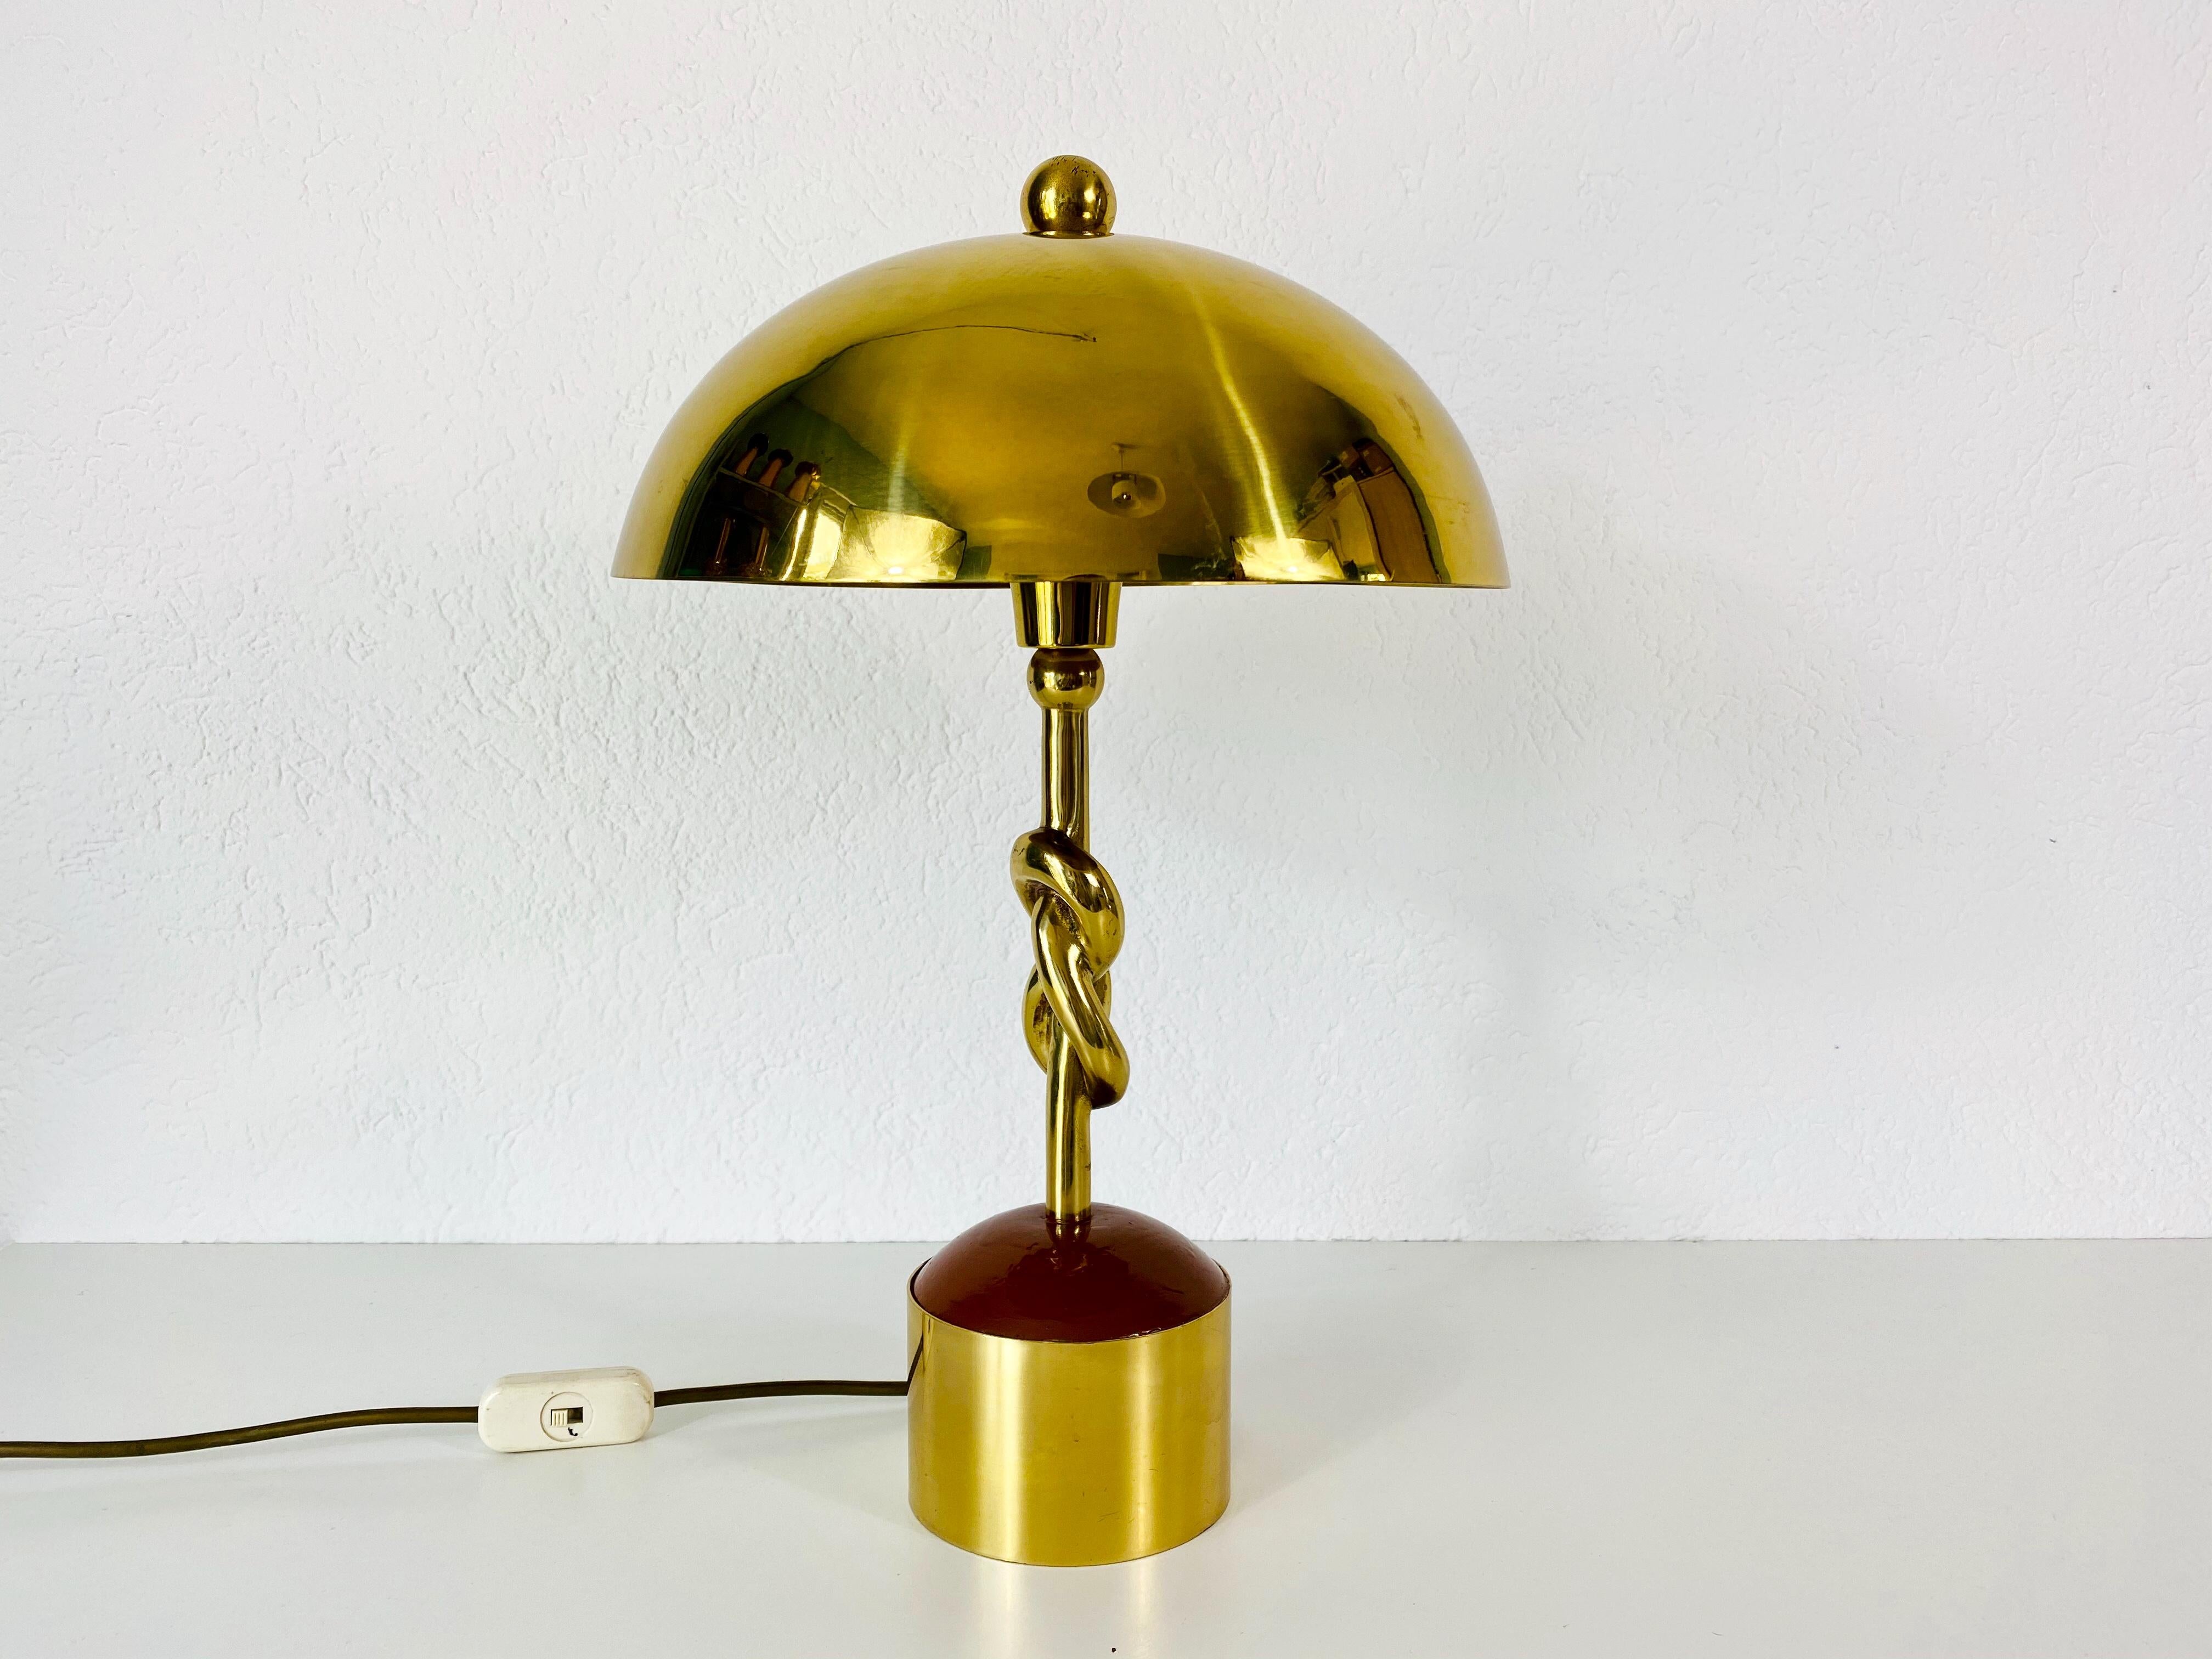 An Italian table lamp made in the 1960s. Made by very heavy solid brass. 

The light requires three E27 light bulbs. Good vintage condition.

Free worldwide shipping.